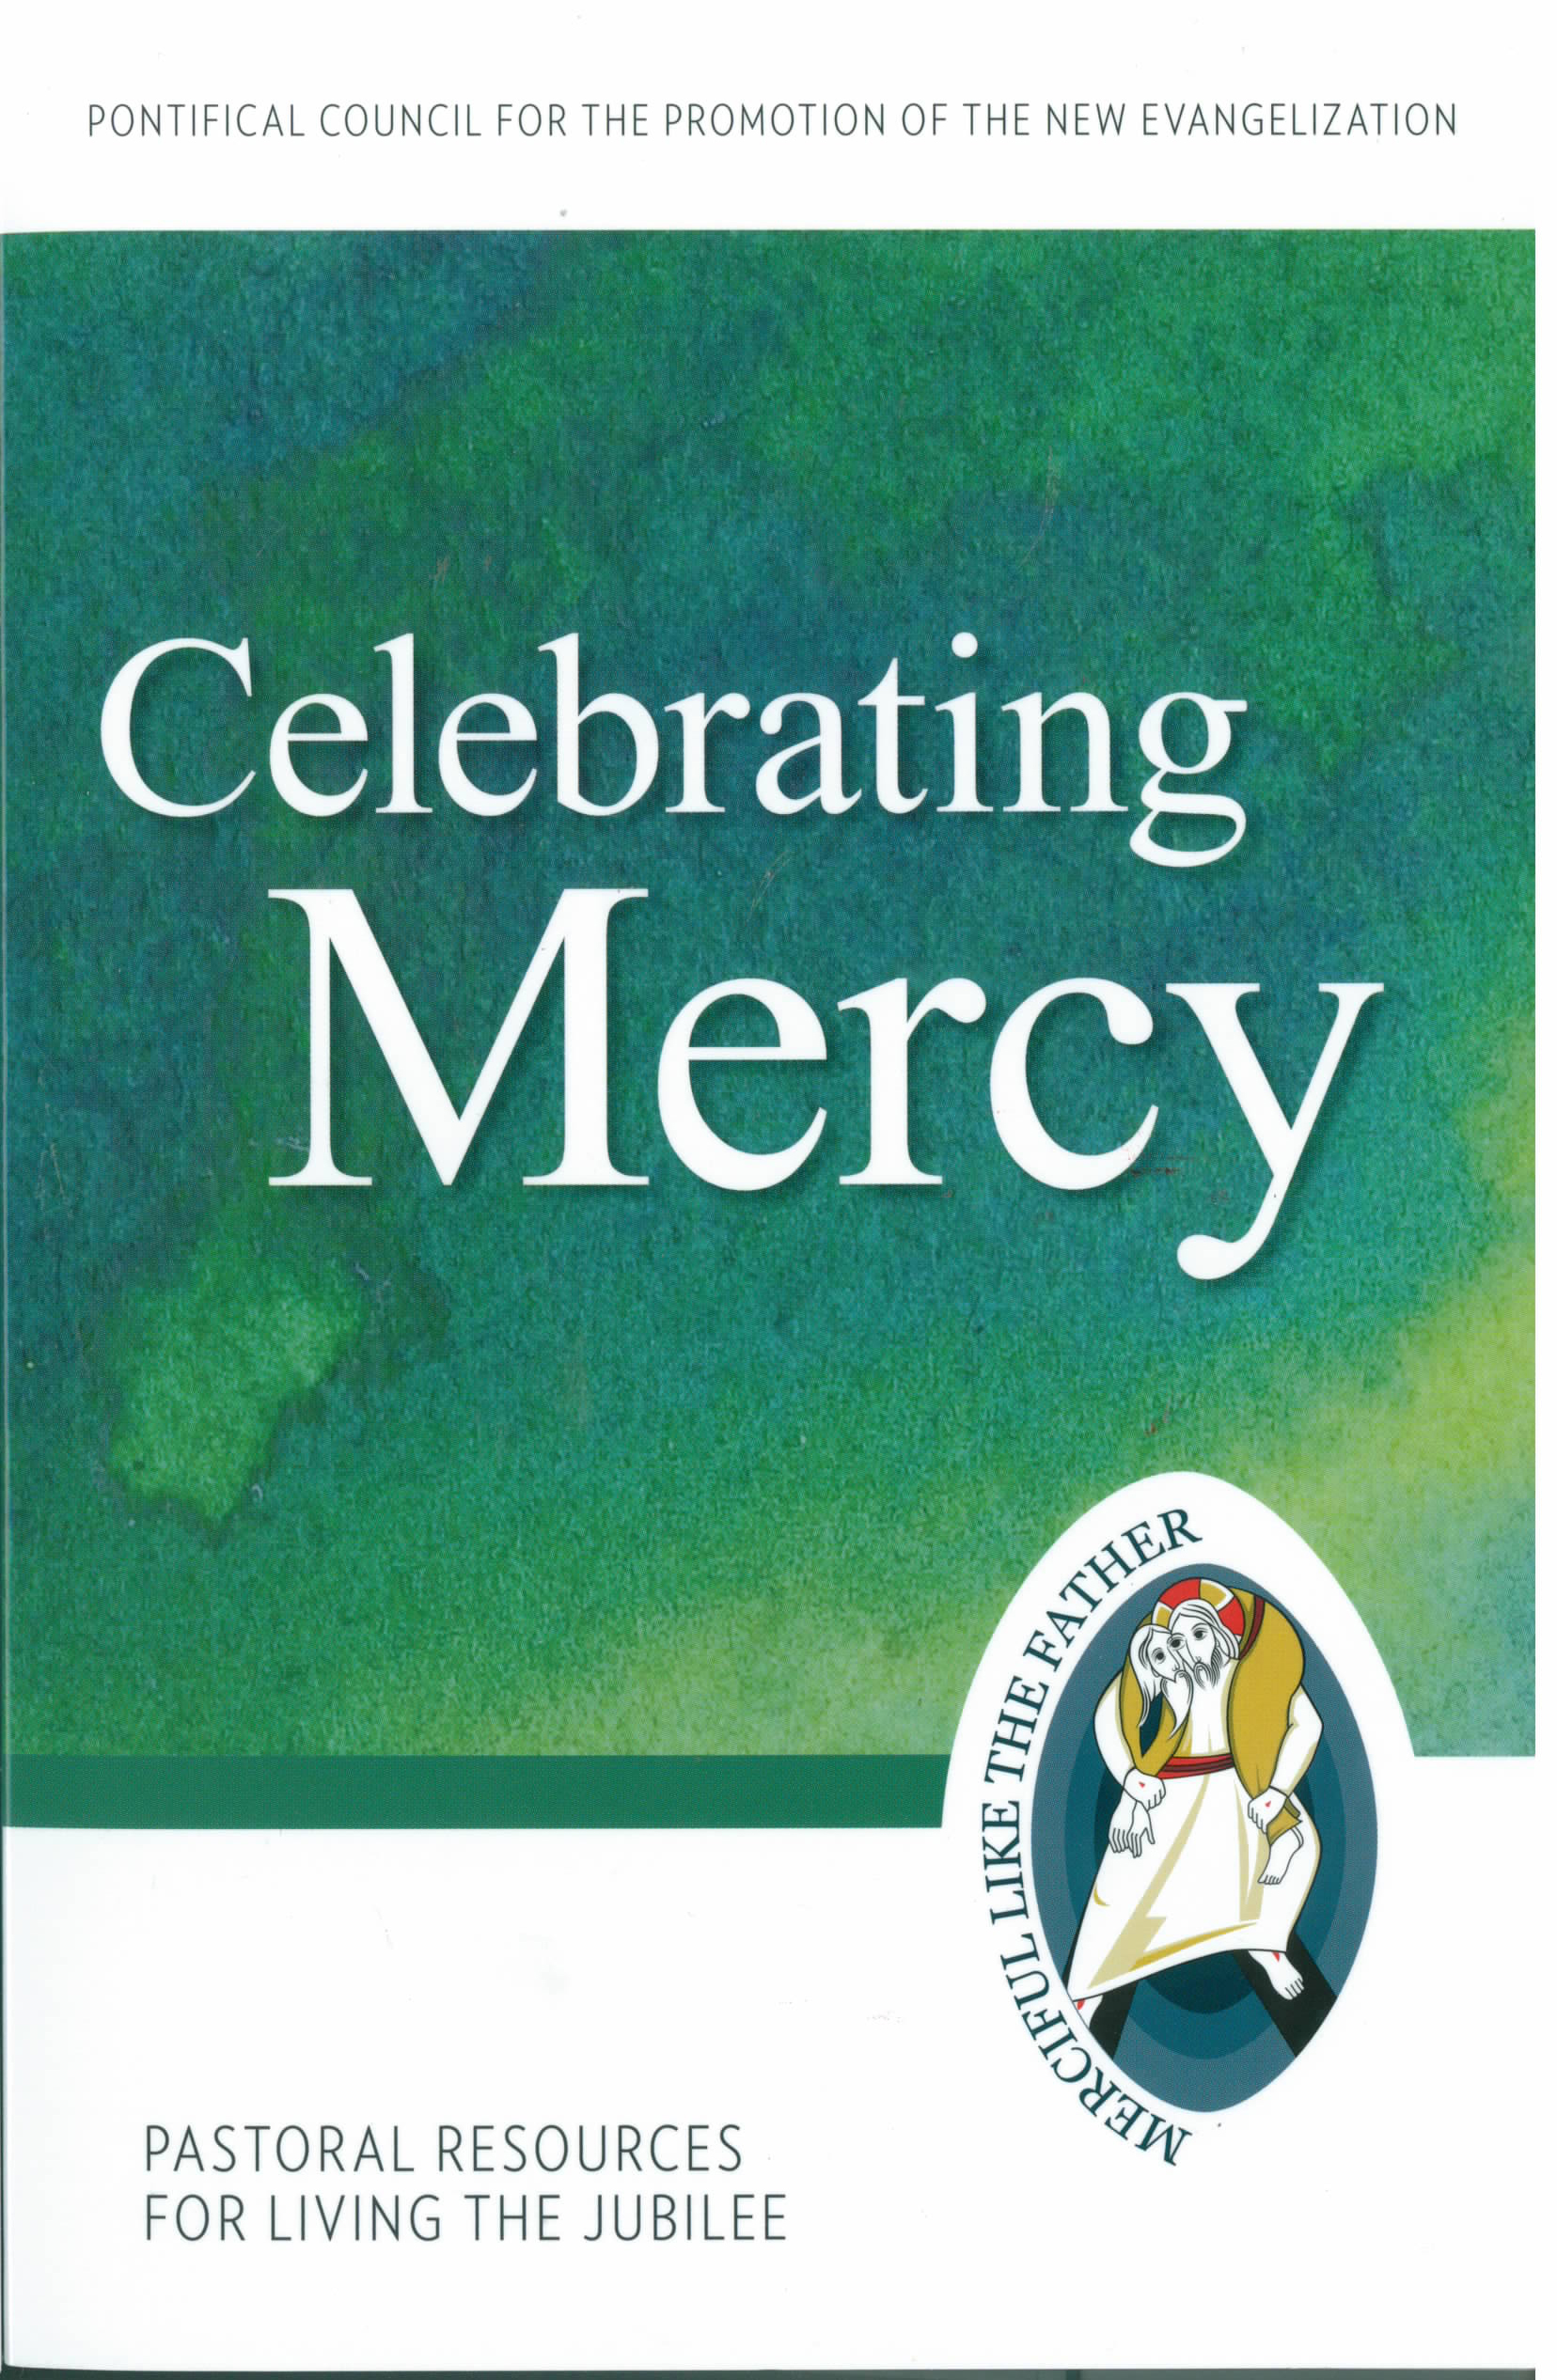 Celebrating Mercy 9781612789750 Pastoral Resources for Living the Jubilee Pontifical Council for the Promotion of the New Evangelization Year of Mercy Books